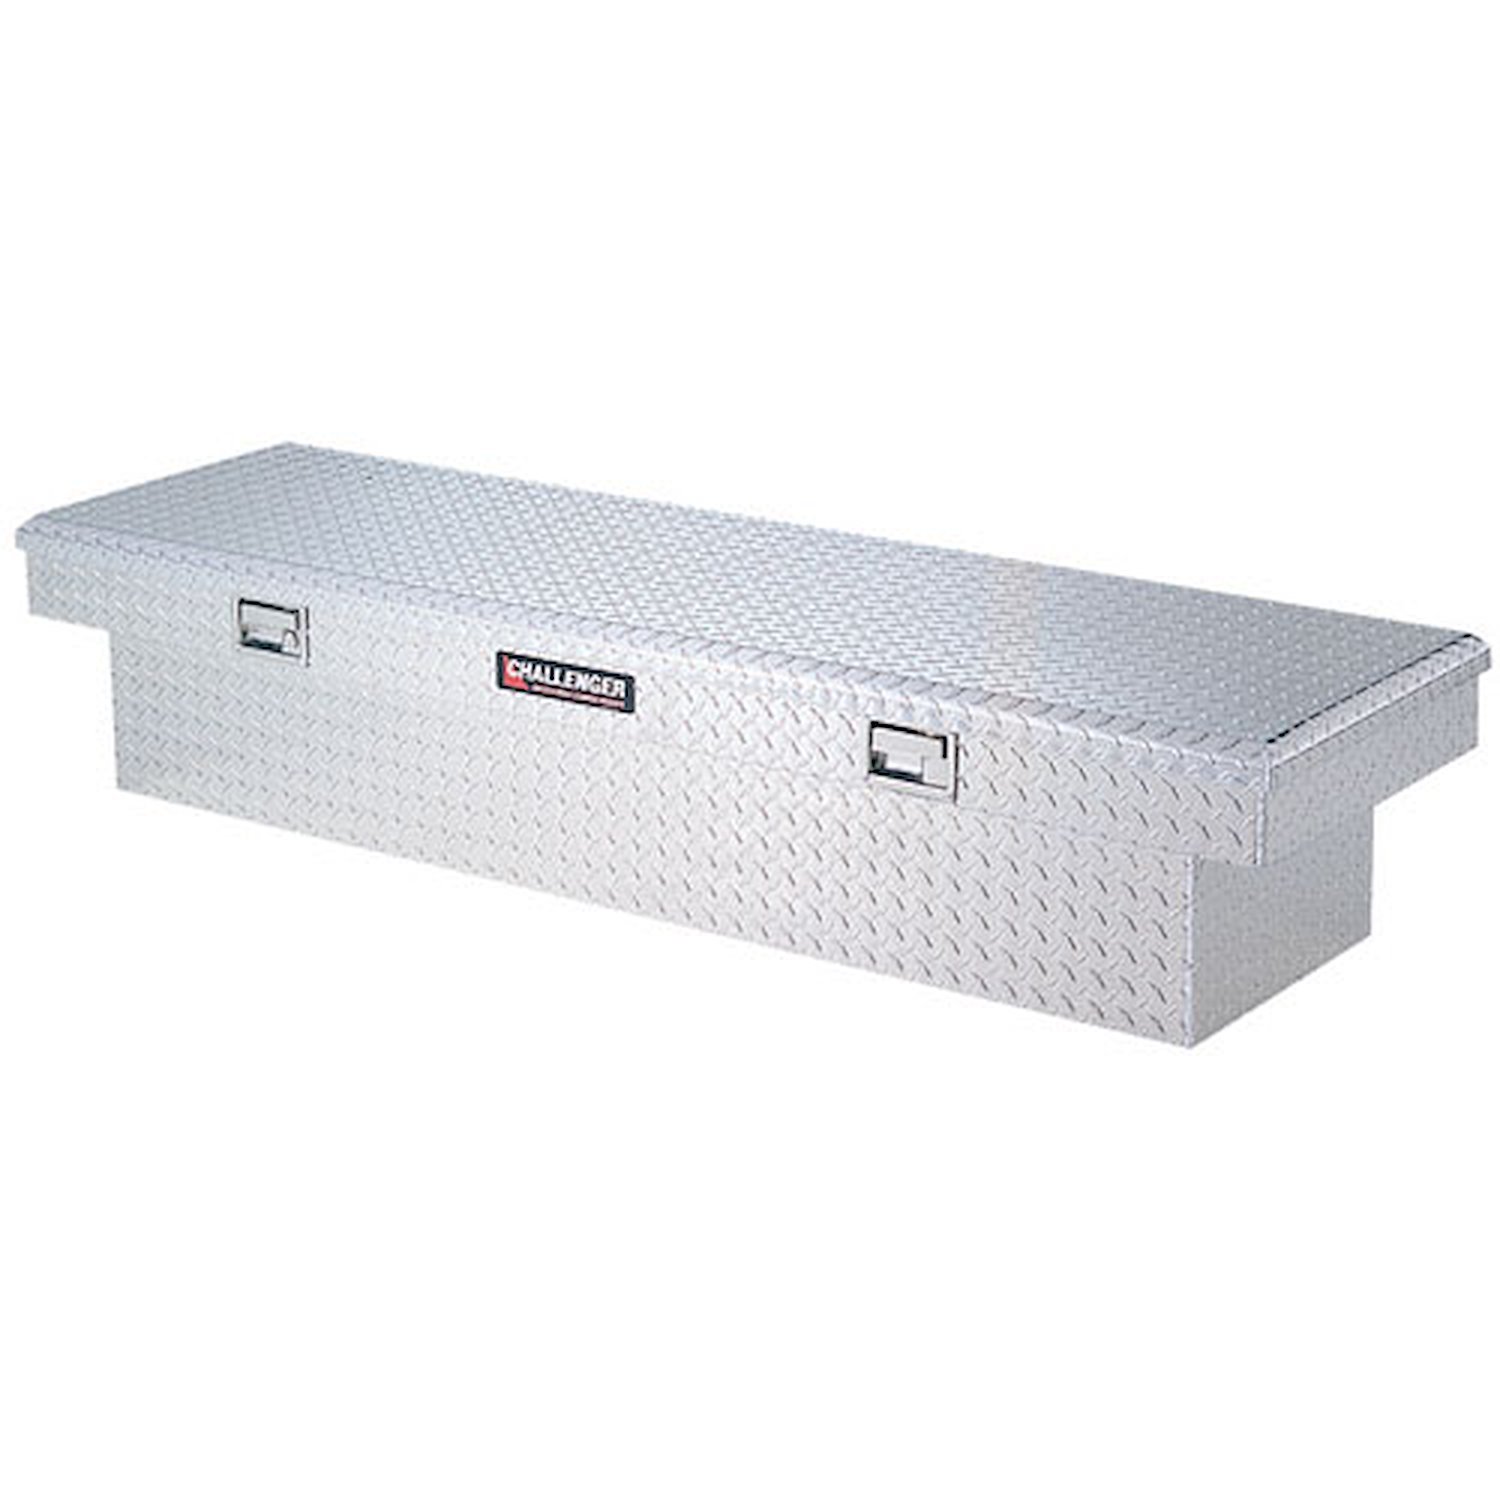 Truck Bed Challenger Tool Box Length: 70.25"